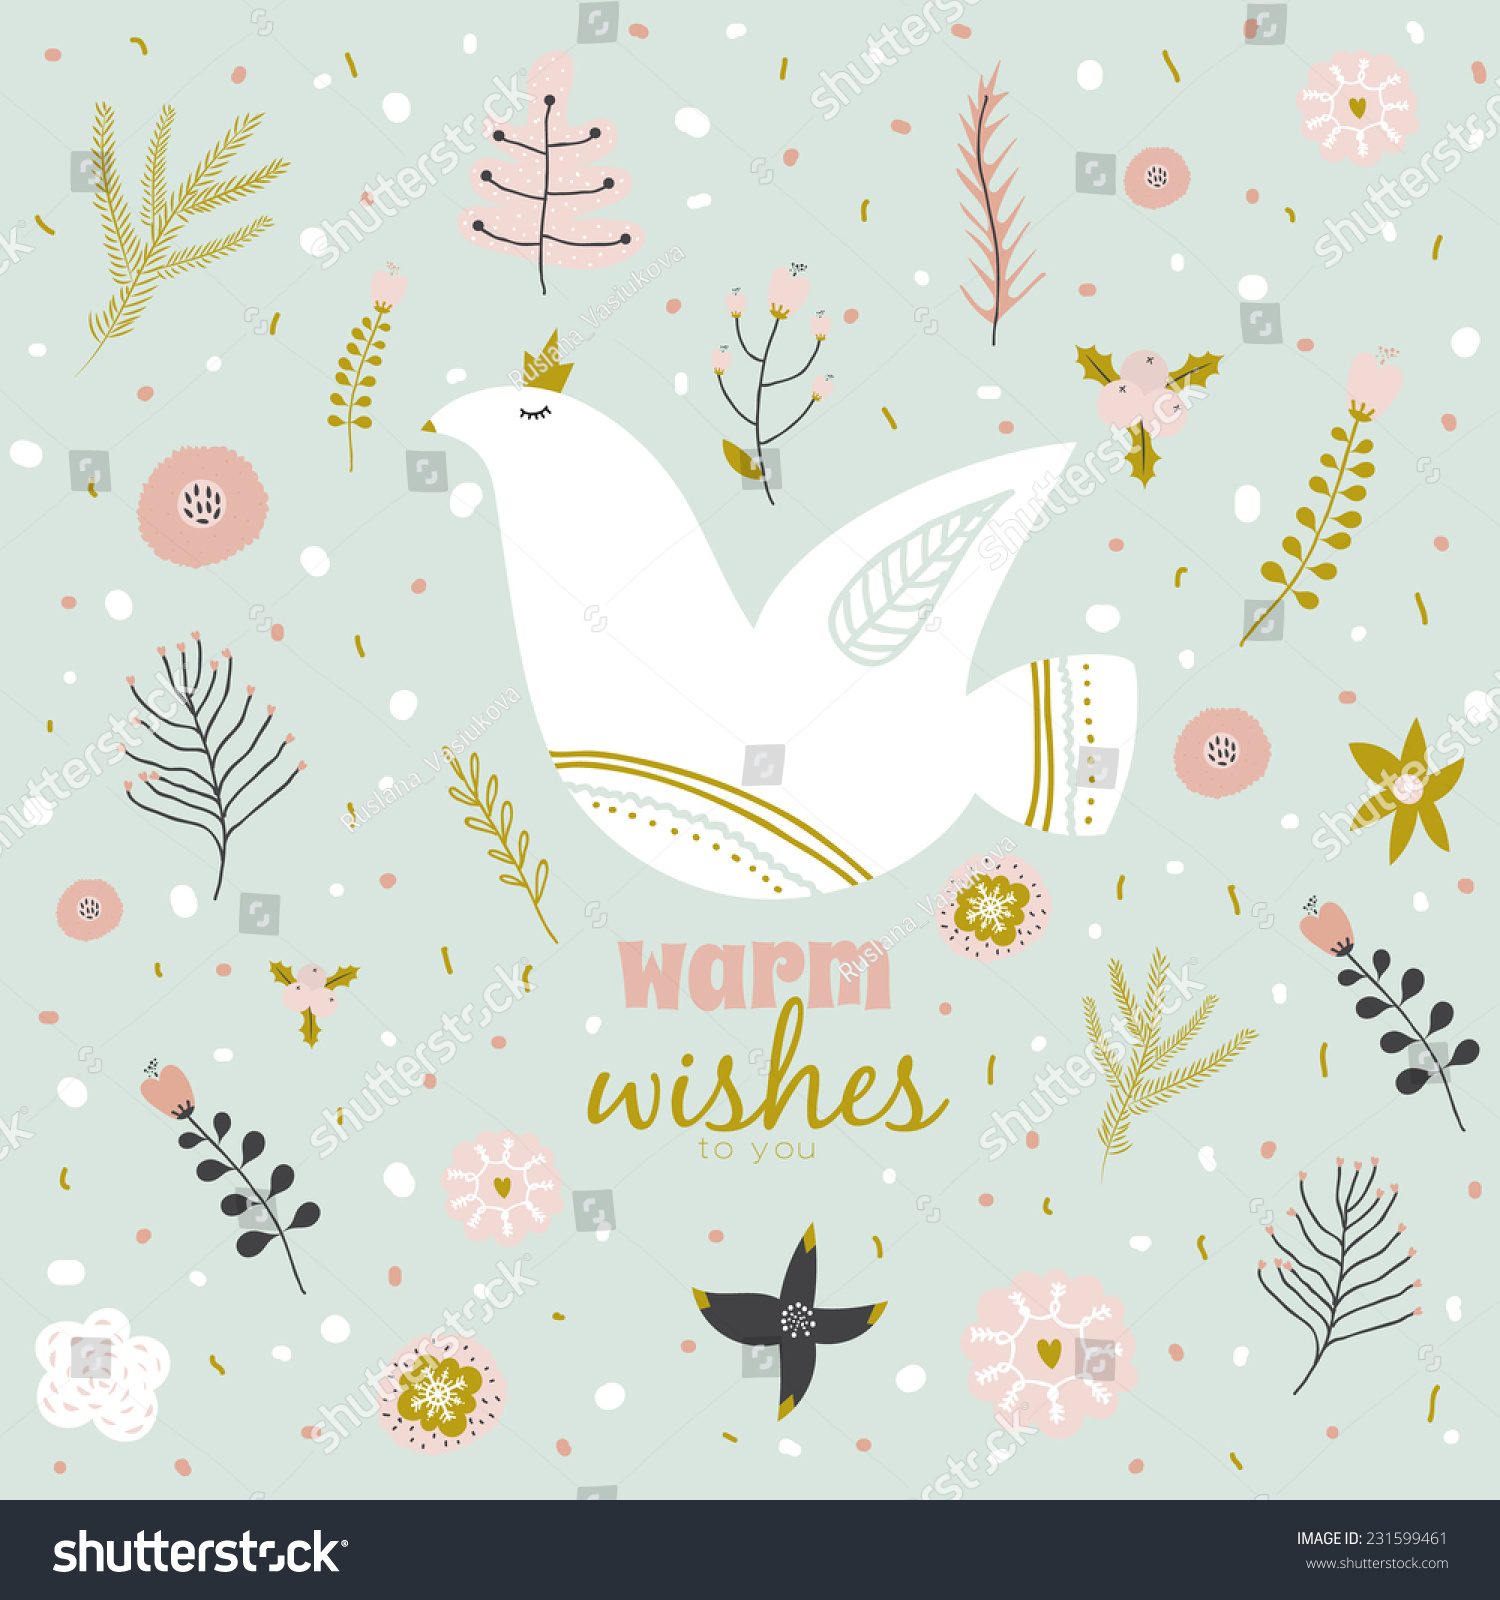 Vintage Merry Christmas And Happy New Year card with flowers and winter dove Greeting stylish